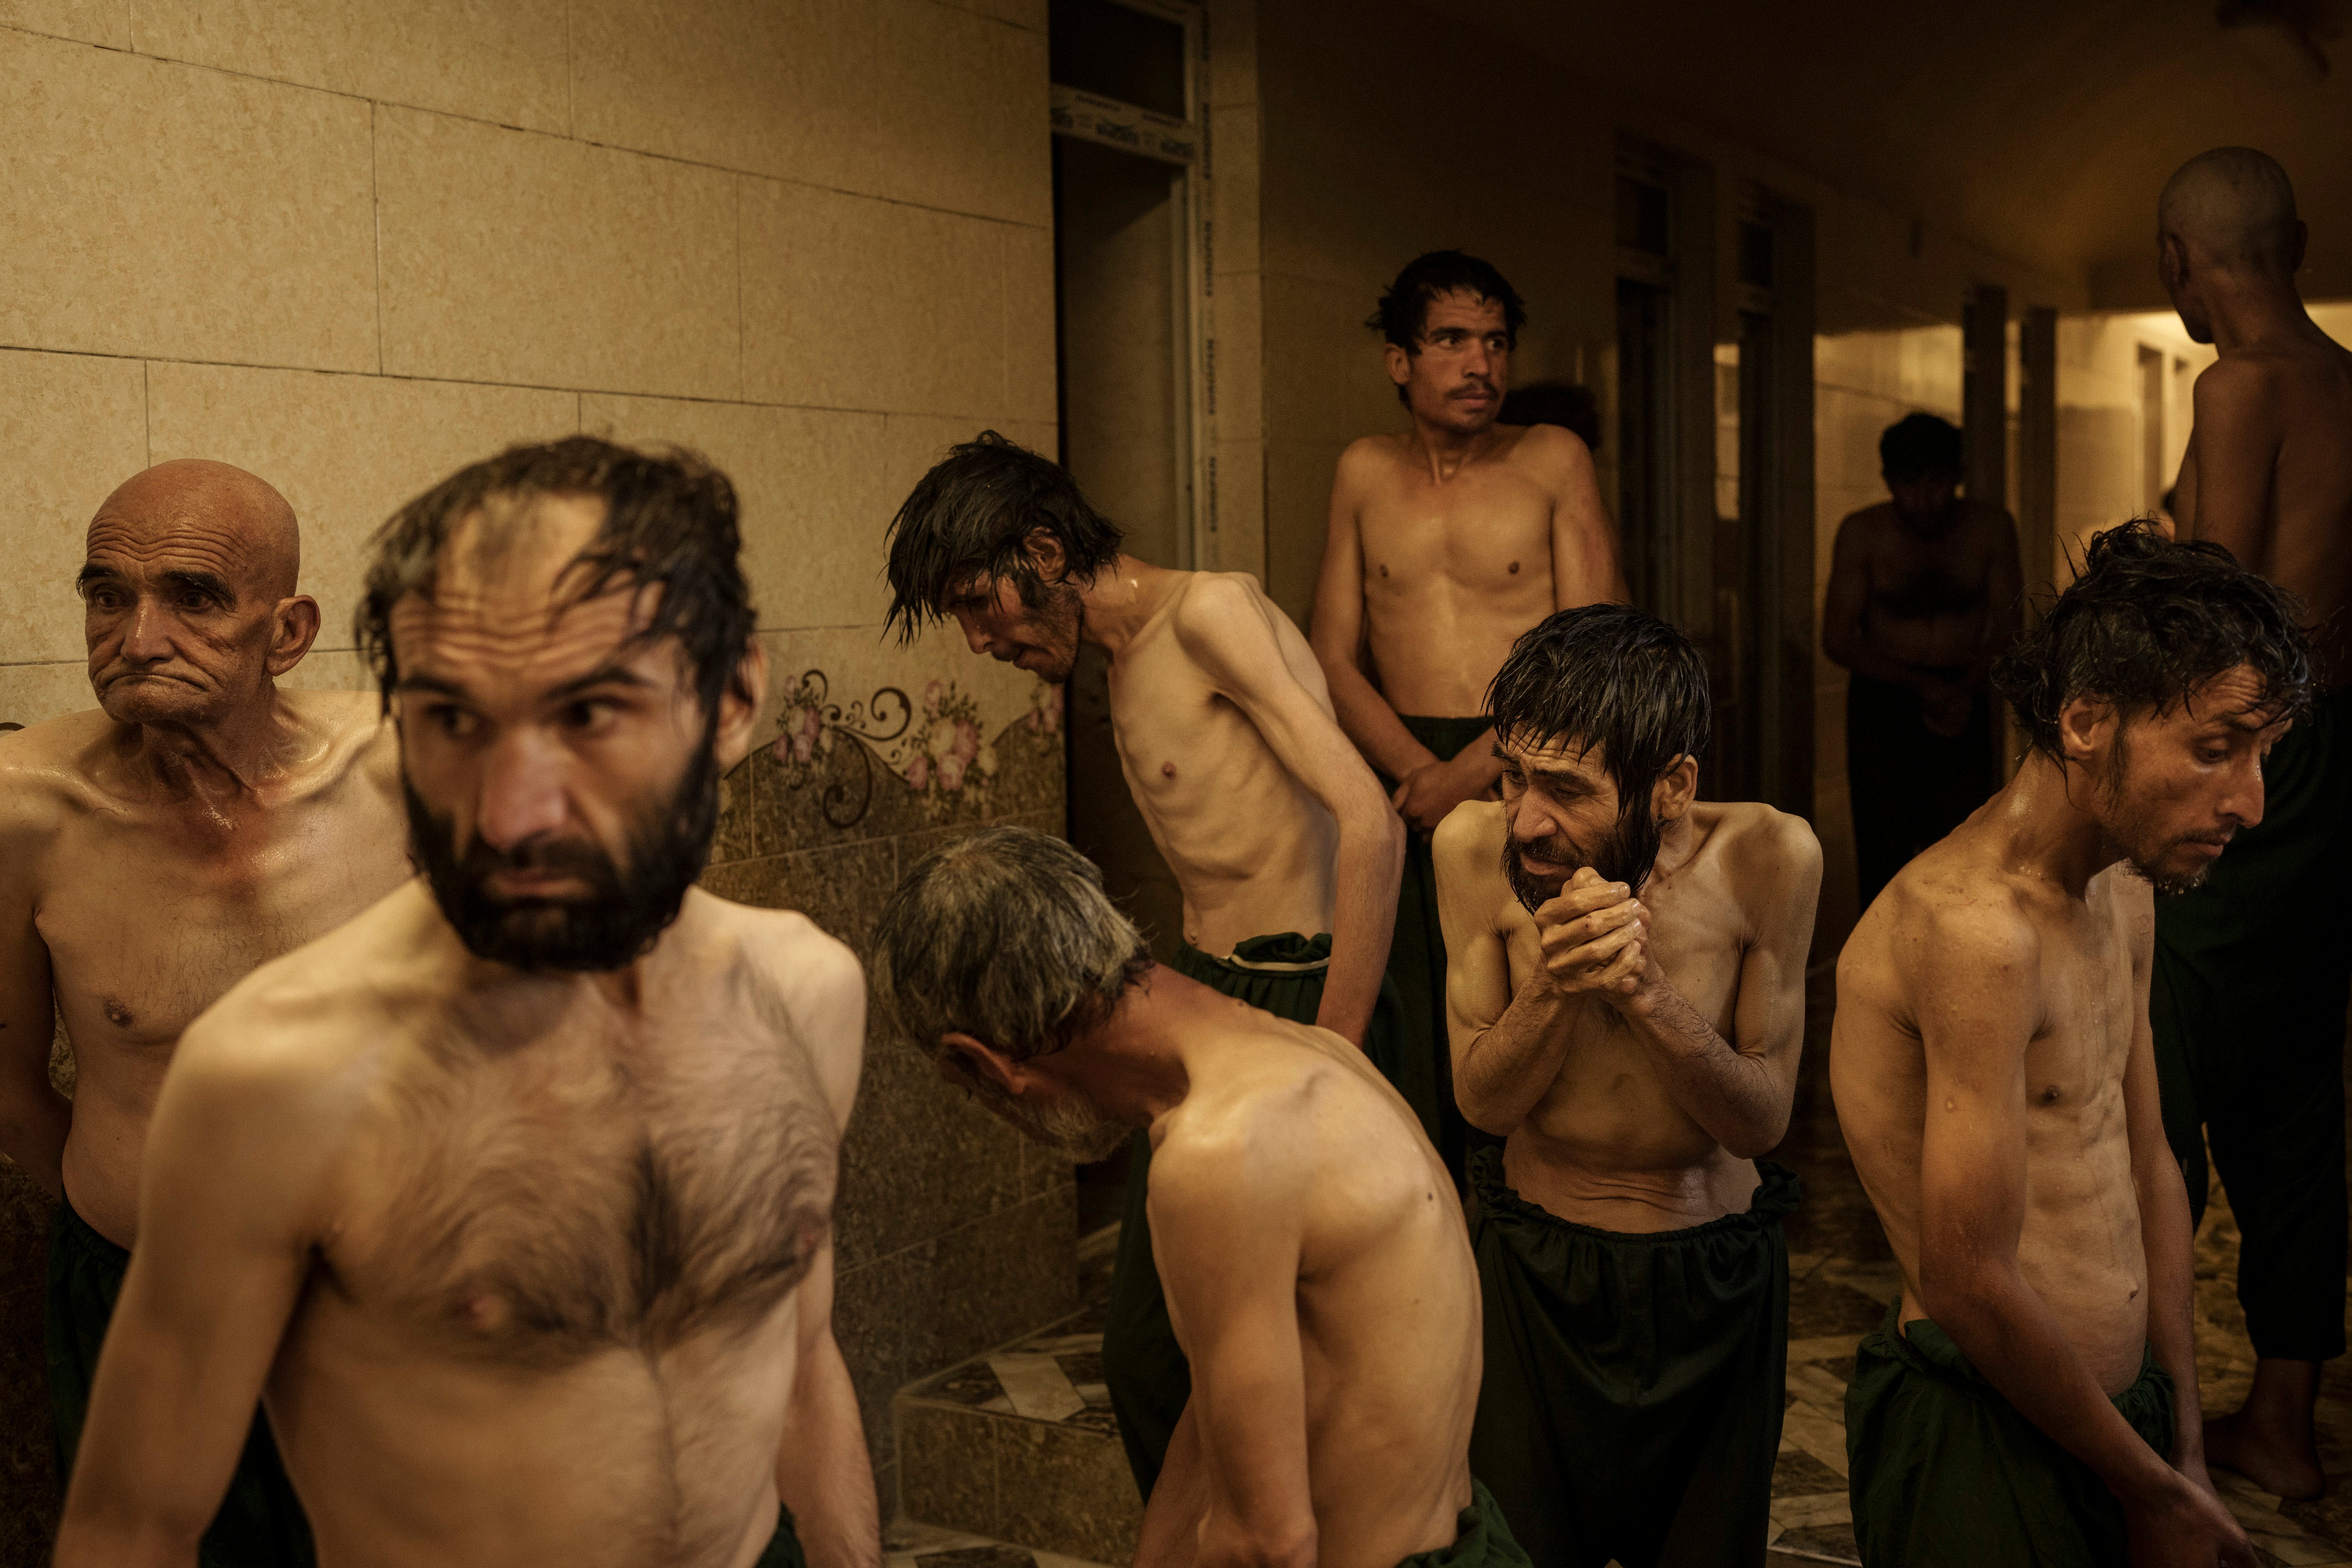 Drug users detained during a Taliban raid wait to be shaved after arriving at Avicenna Medical Hospital for Drug Treatment in Kabul, Afghanistan, on Oct. 1, 2021.